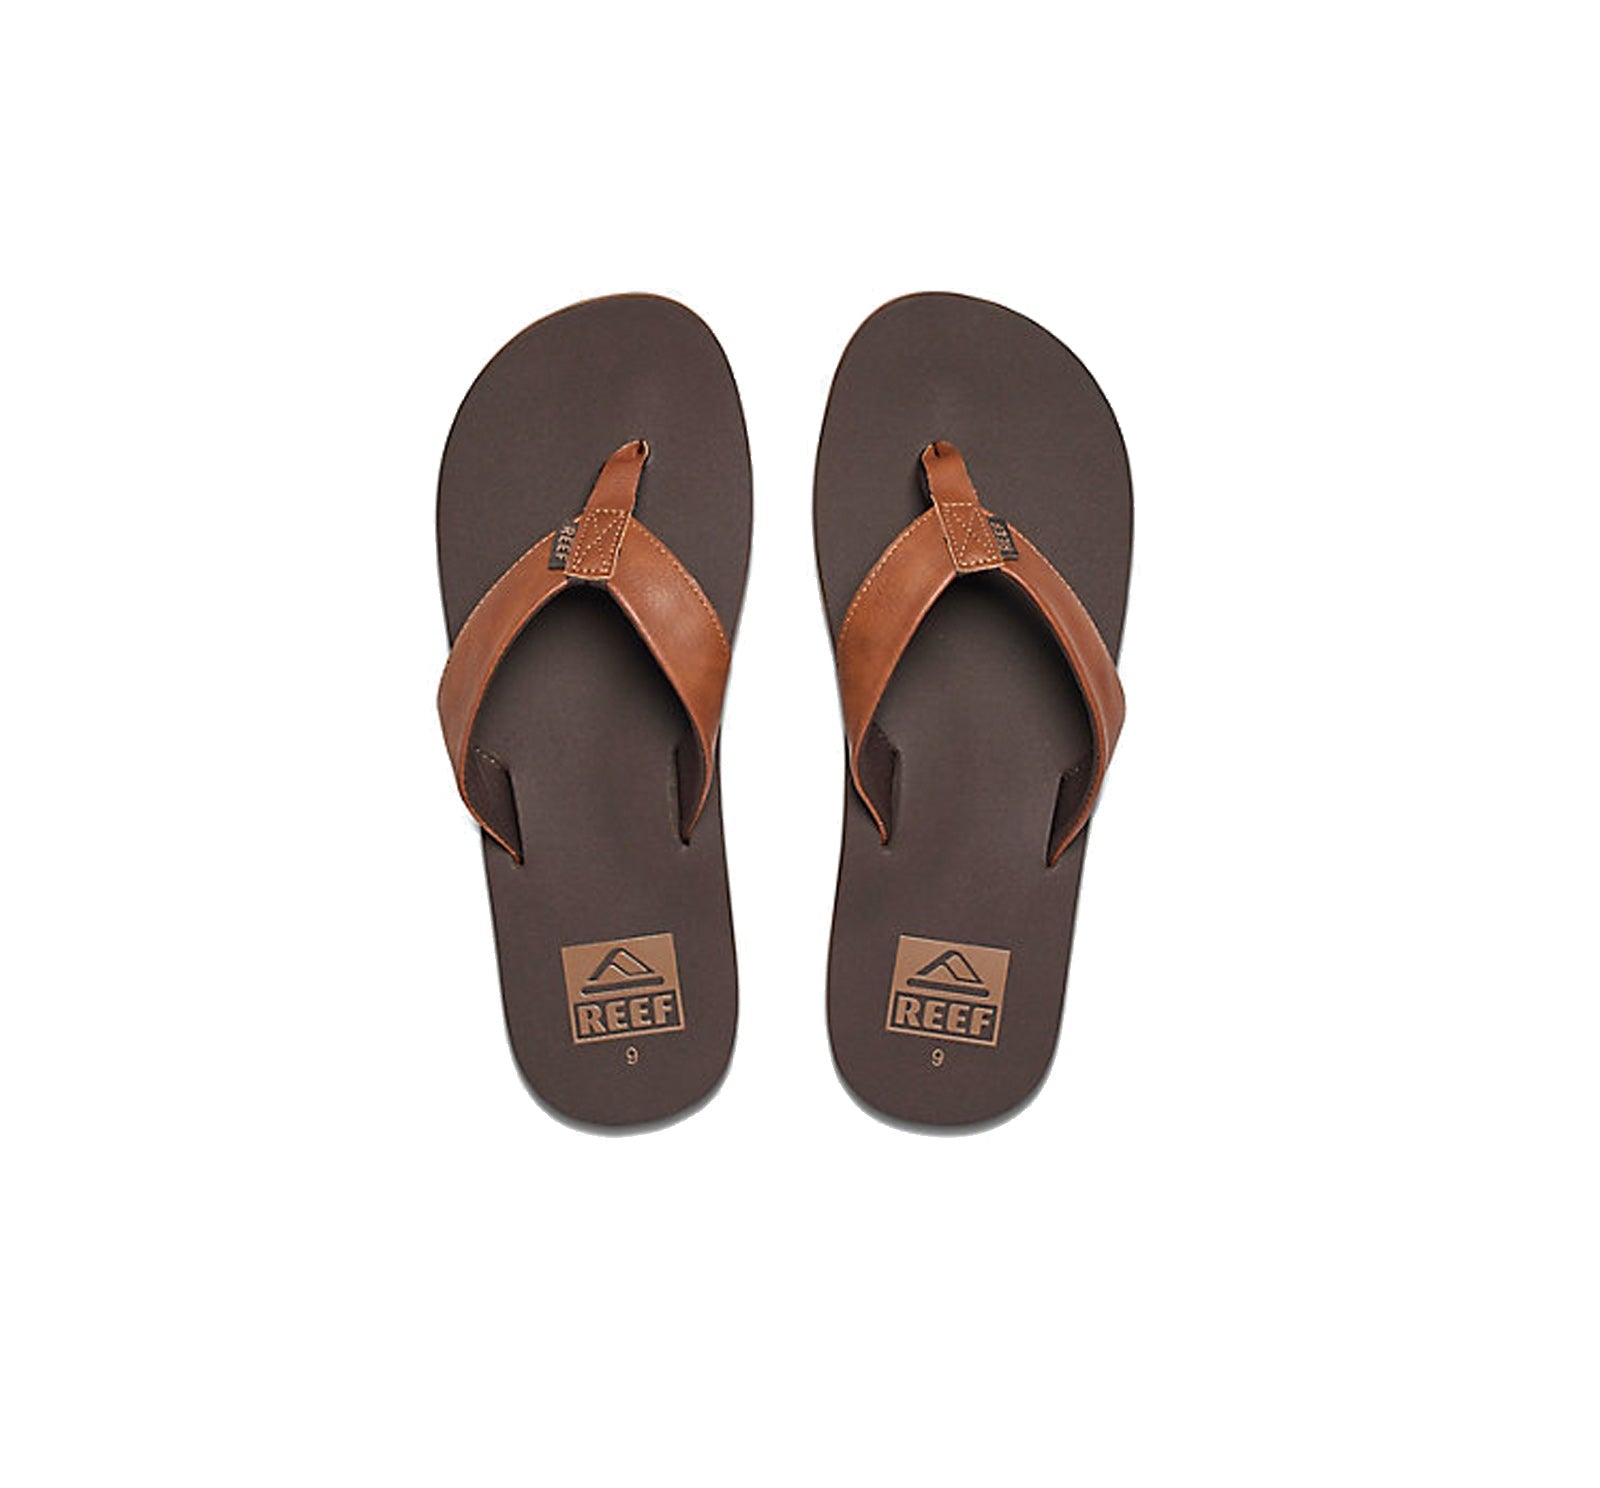 Reef Twinpin Youth Boy's Sandals